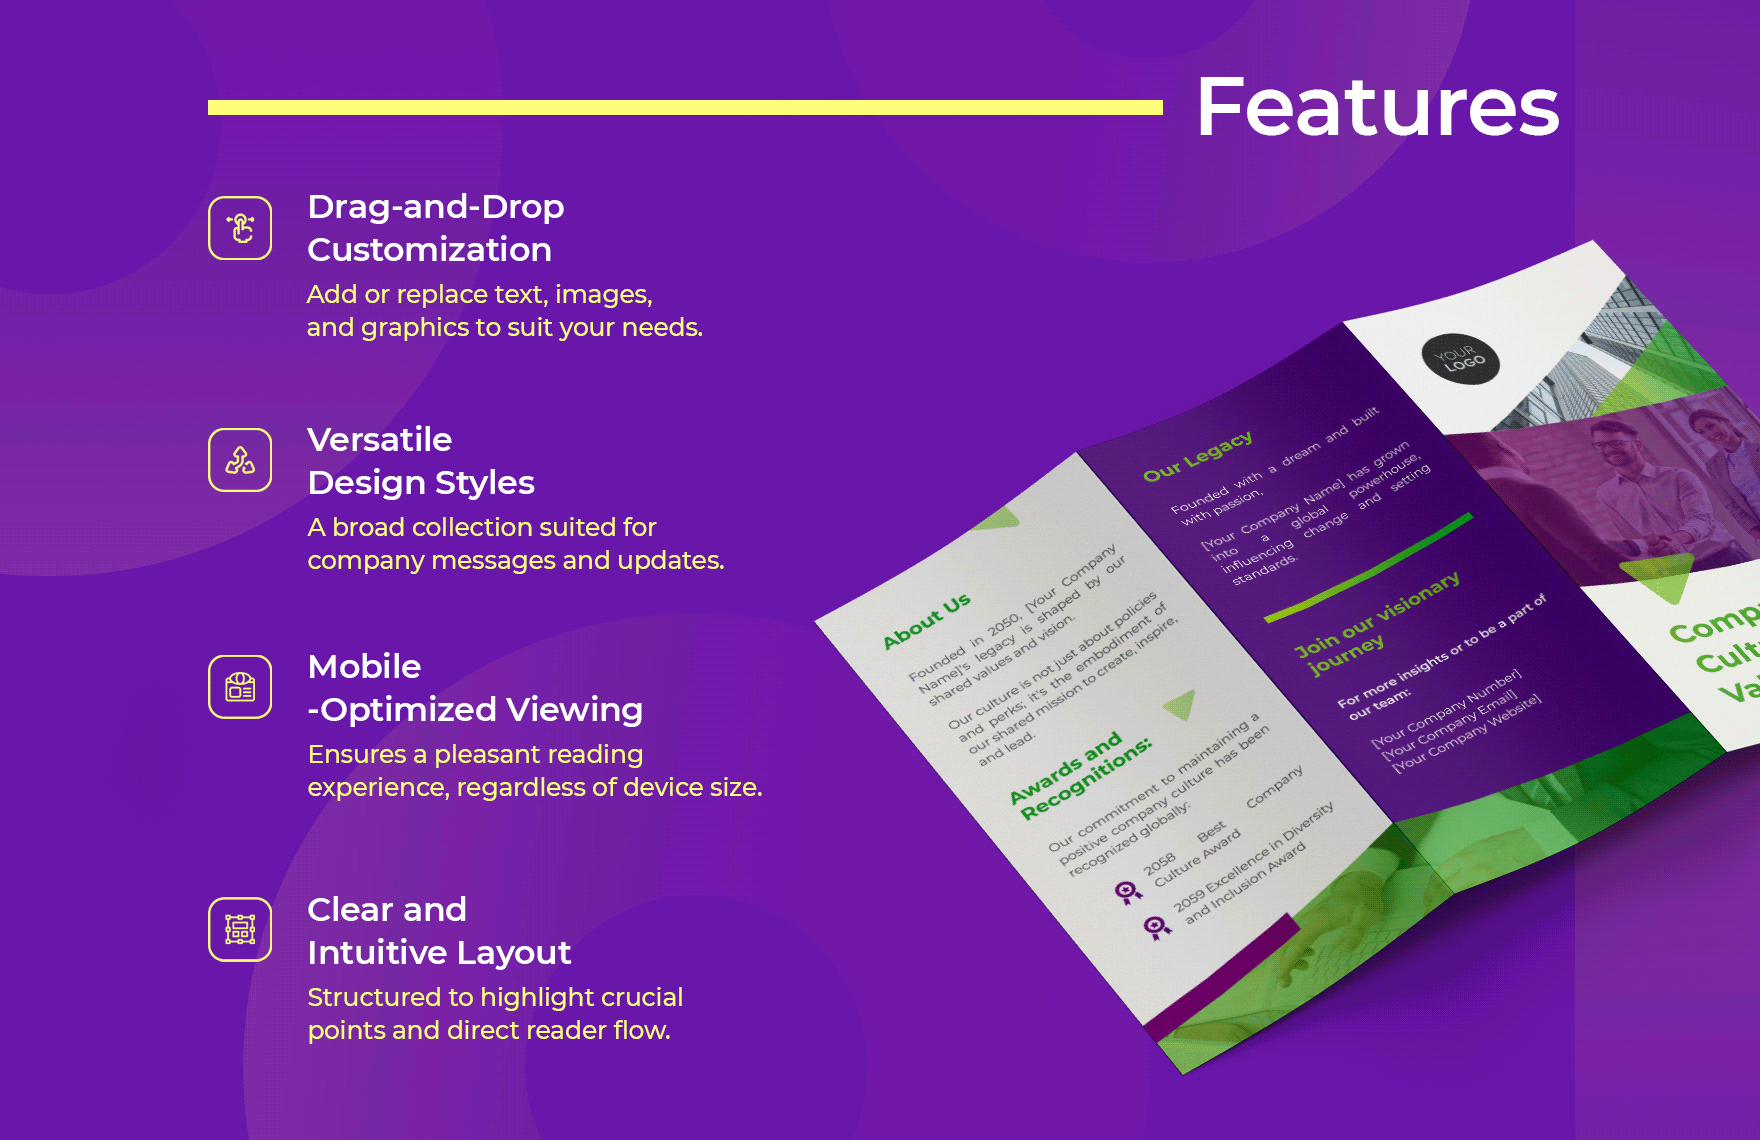 Company Culture and Values Brochure HR Template